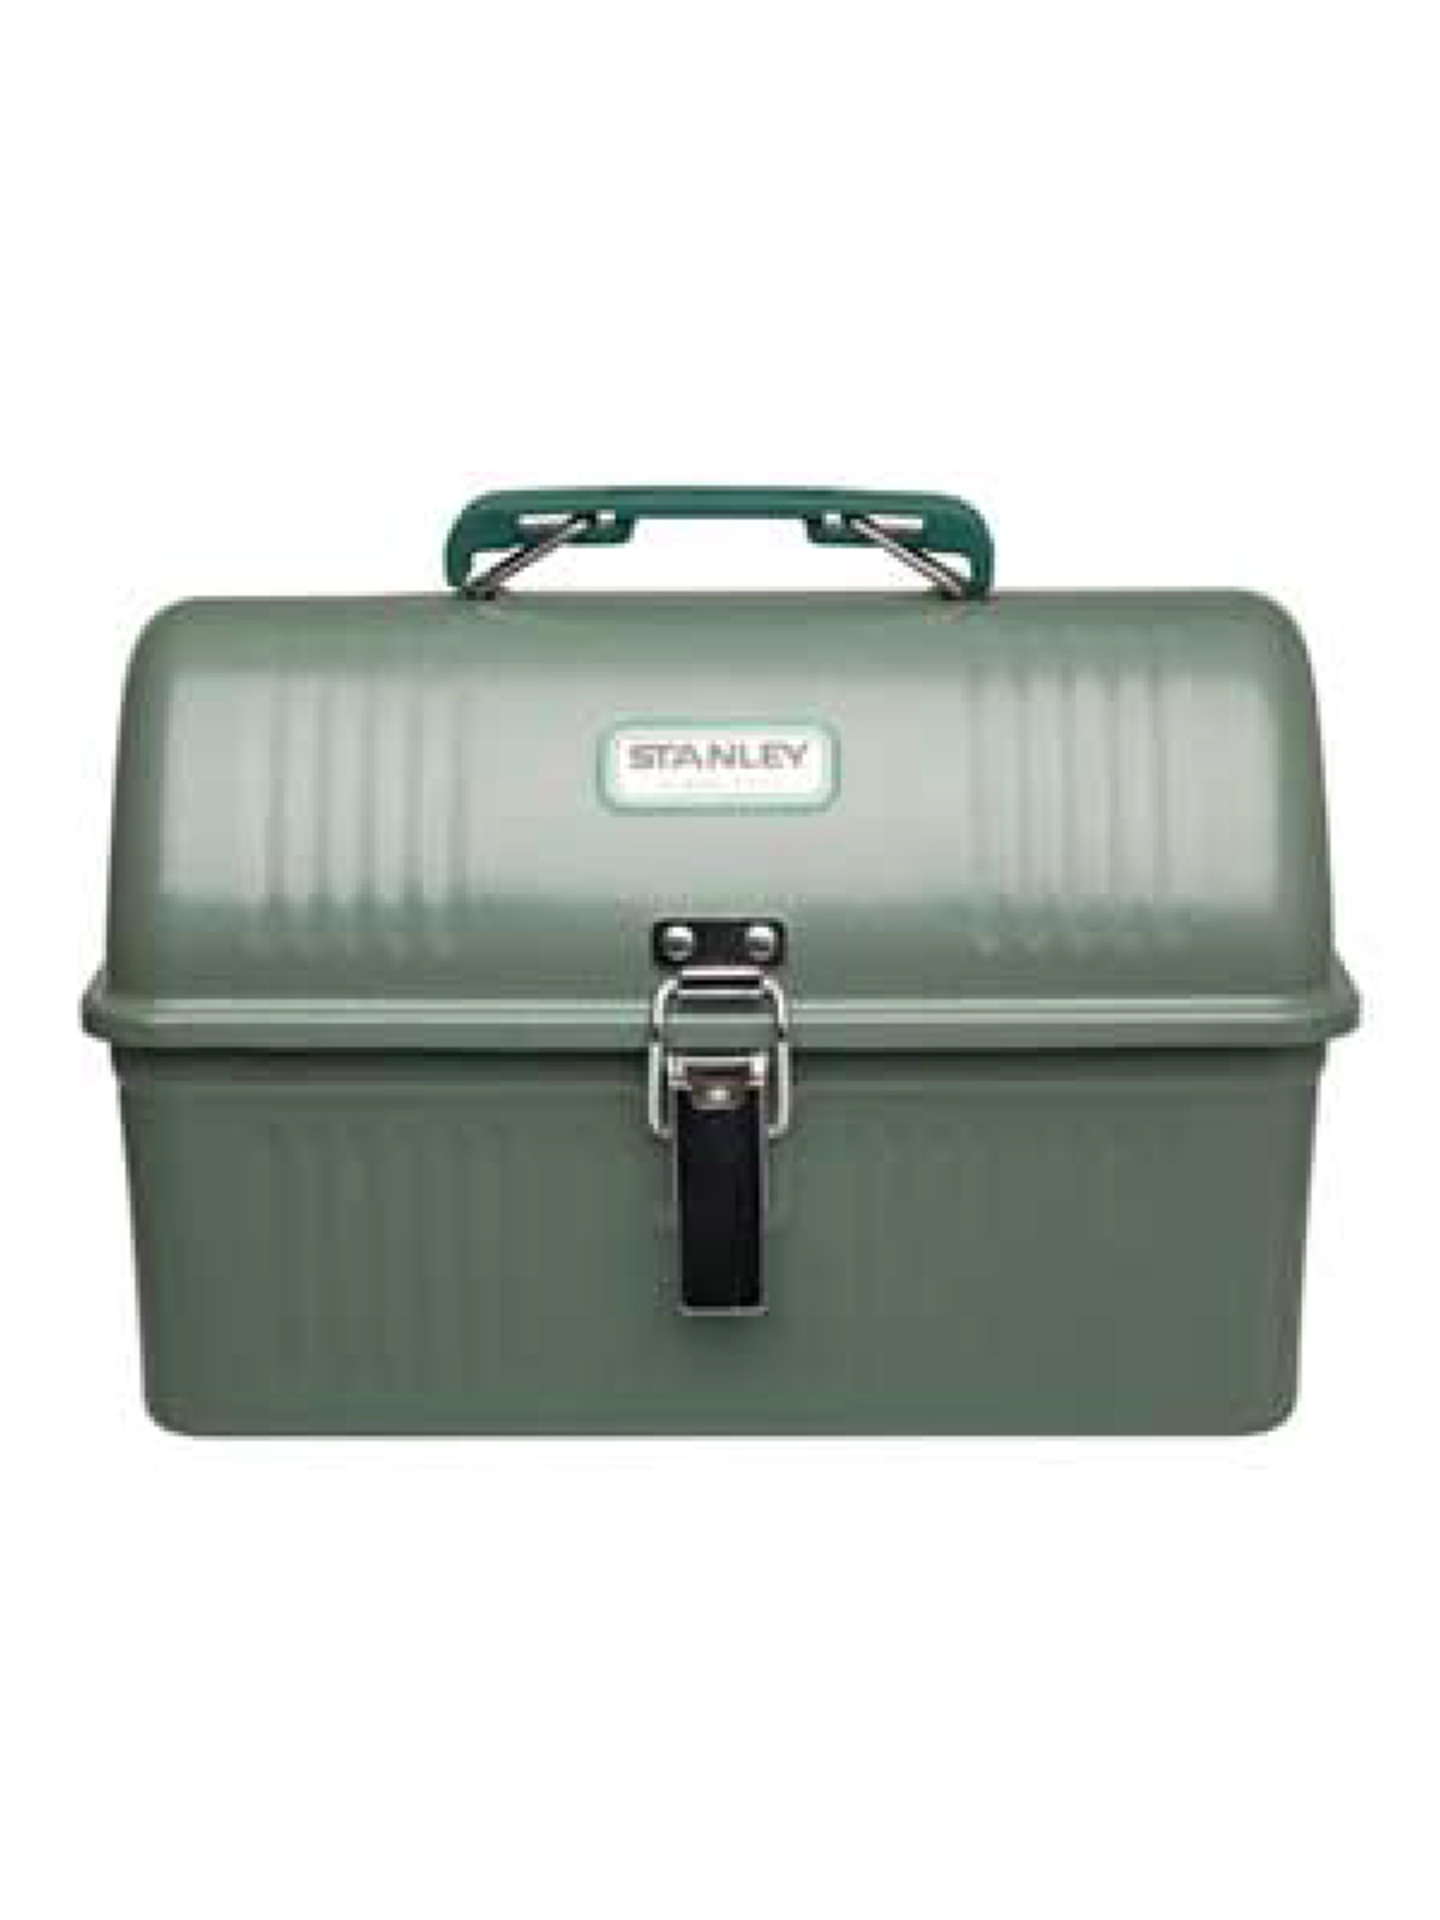 [Stanley] CLASSIC LUNCH BOX 5.2L (GREEN)